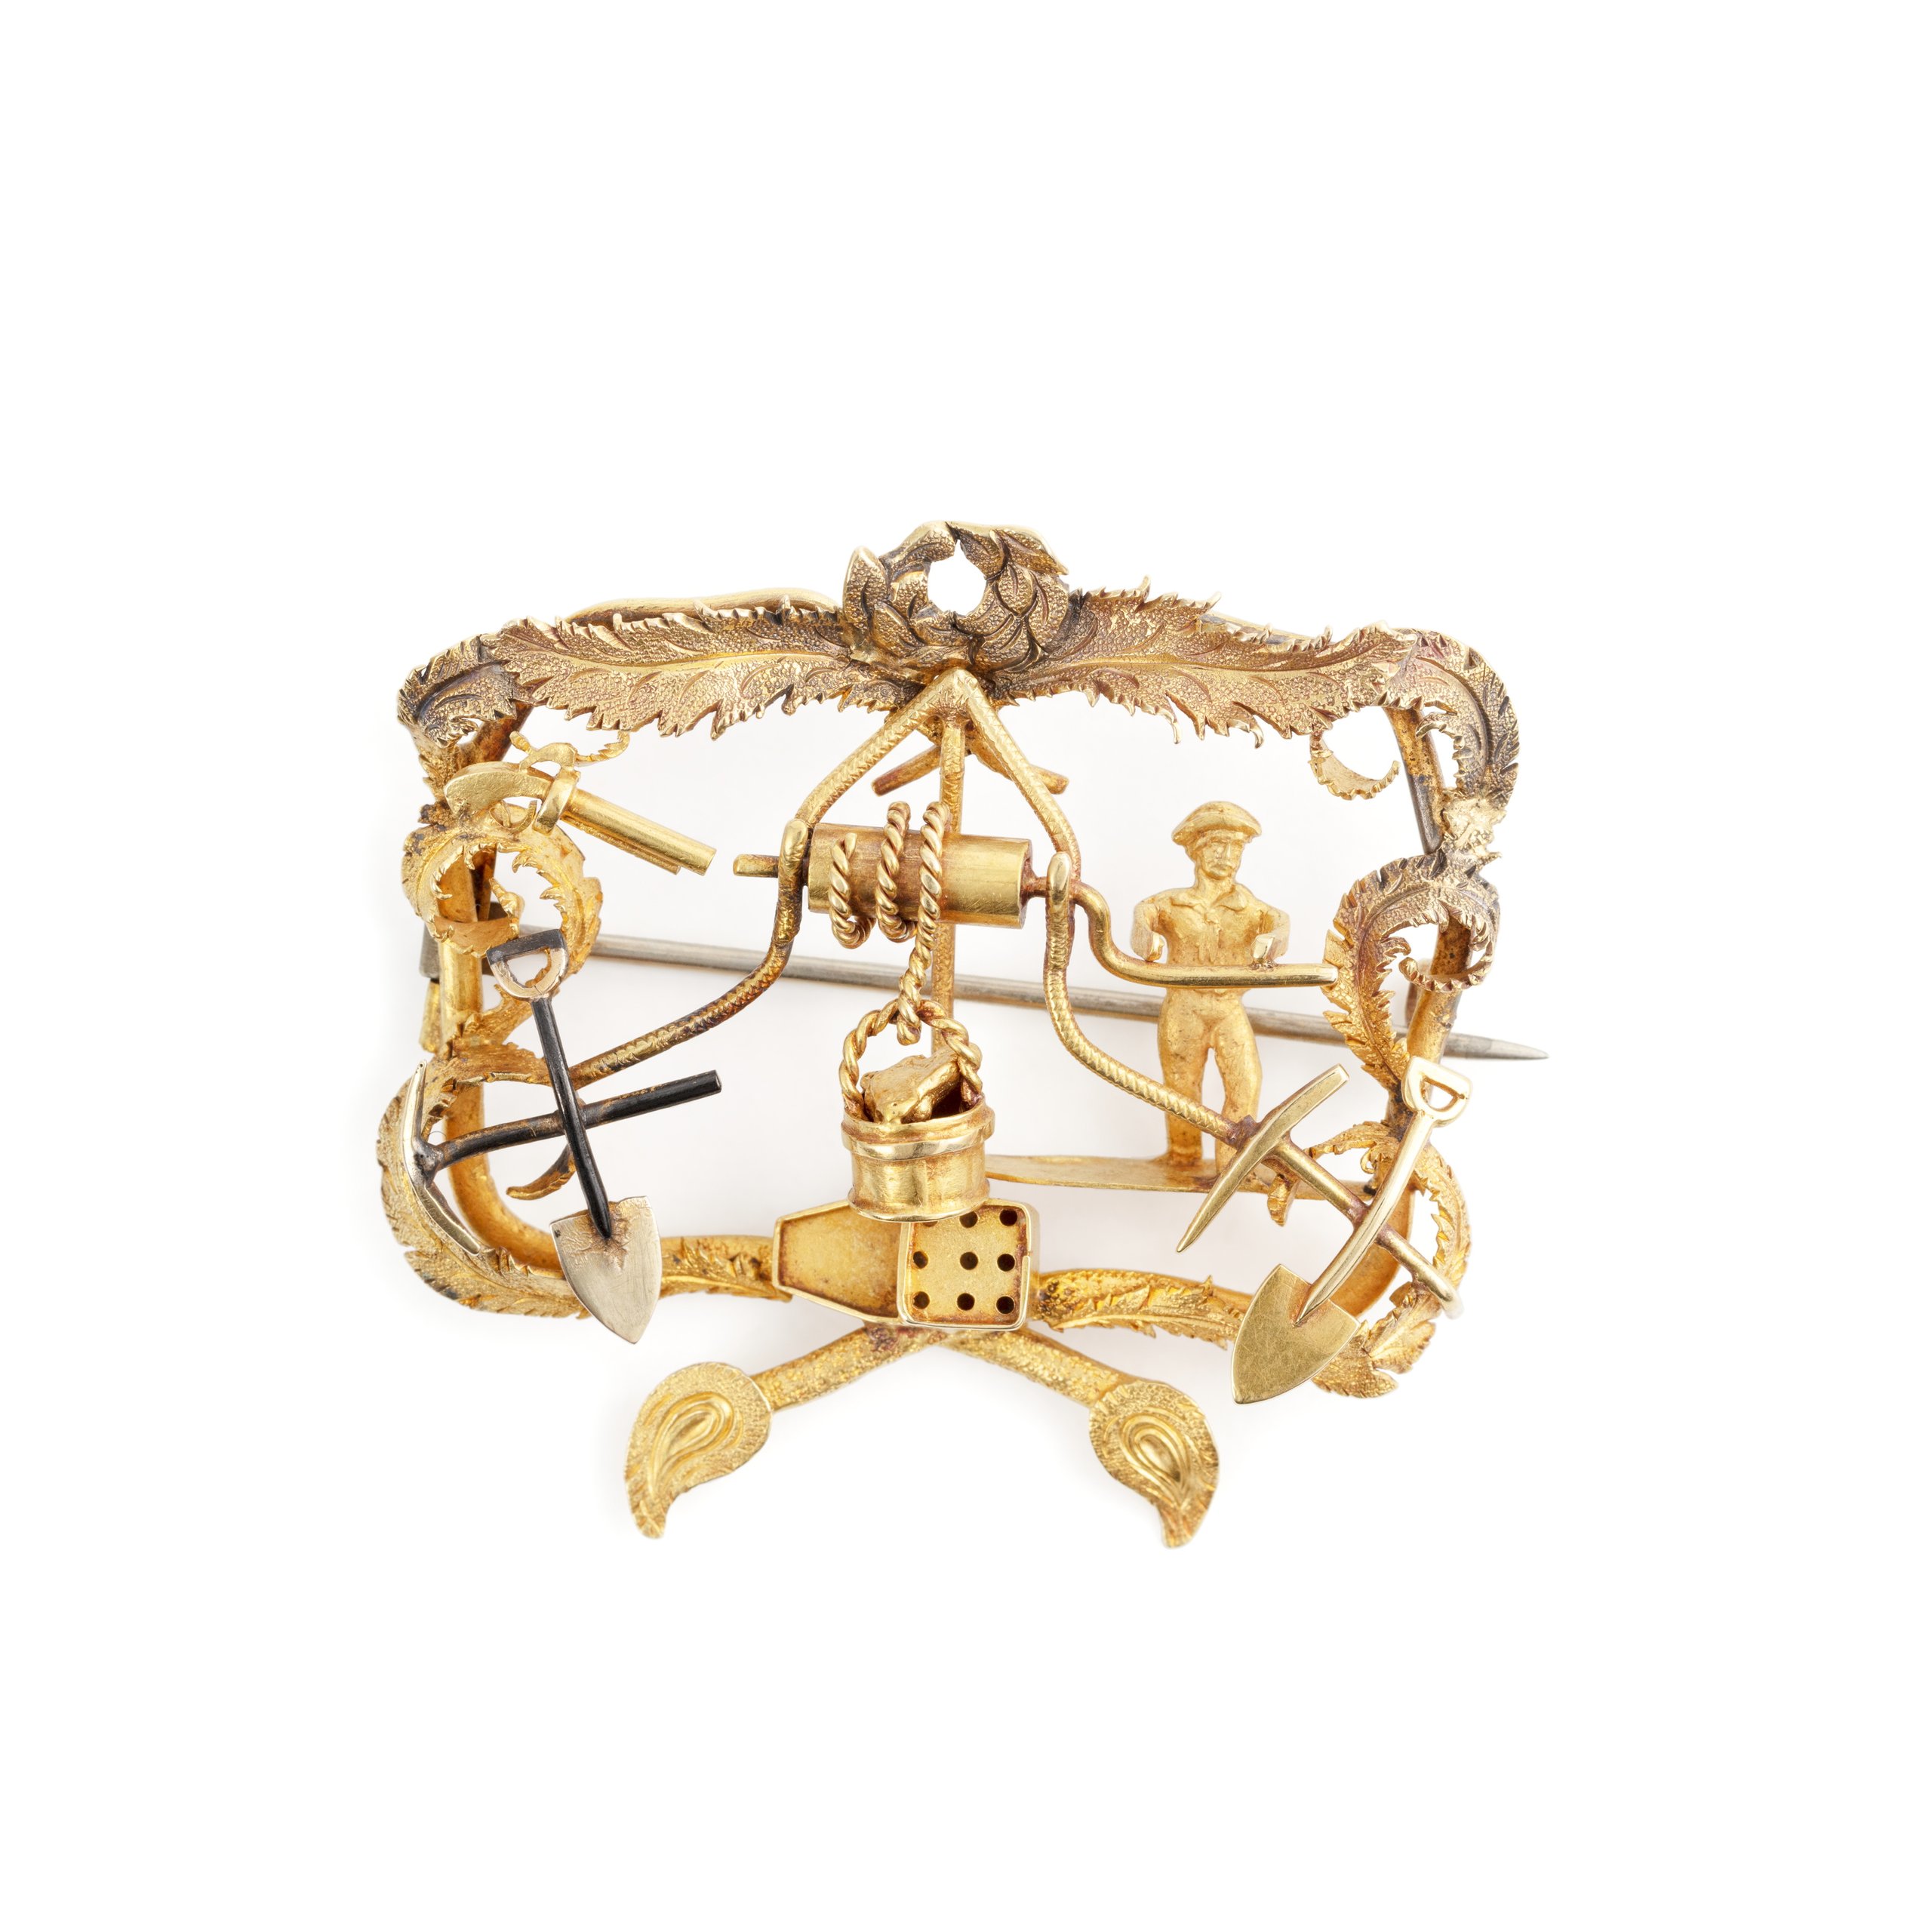 Goldfields brooch commissioned by Edward Austin